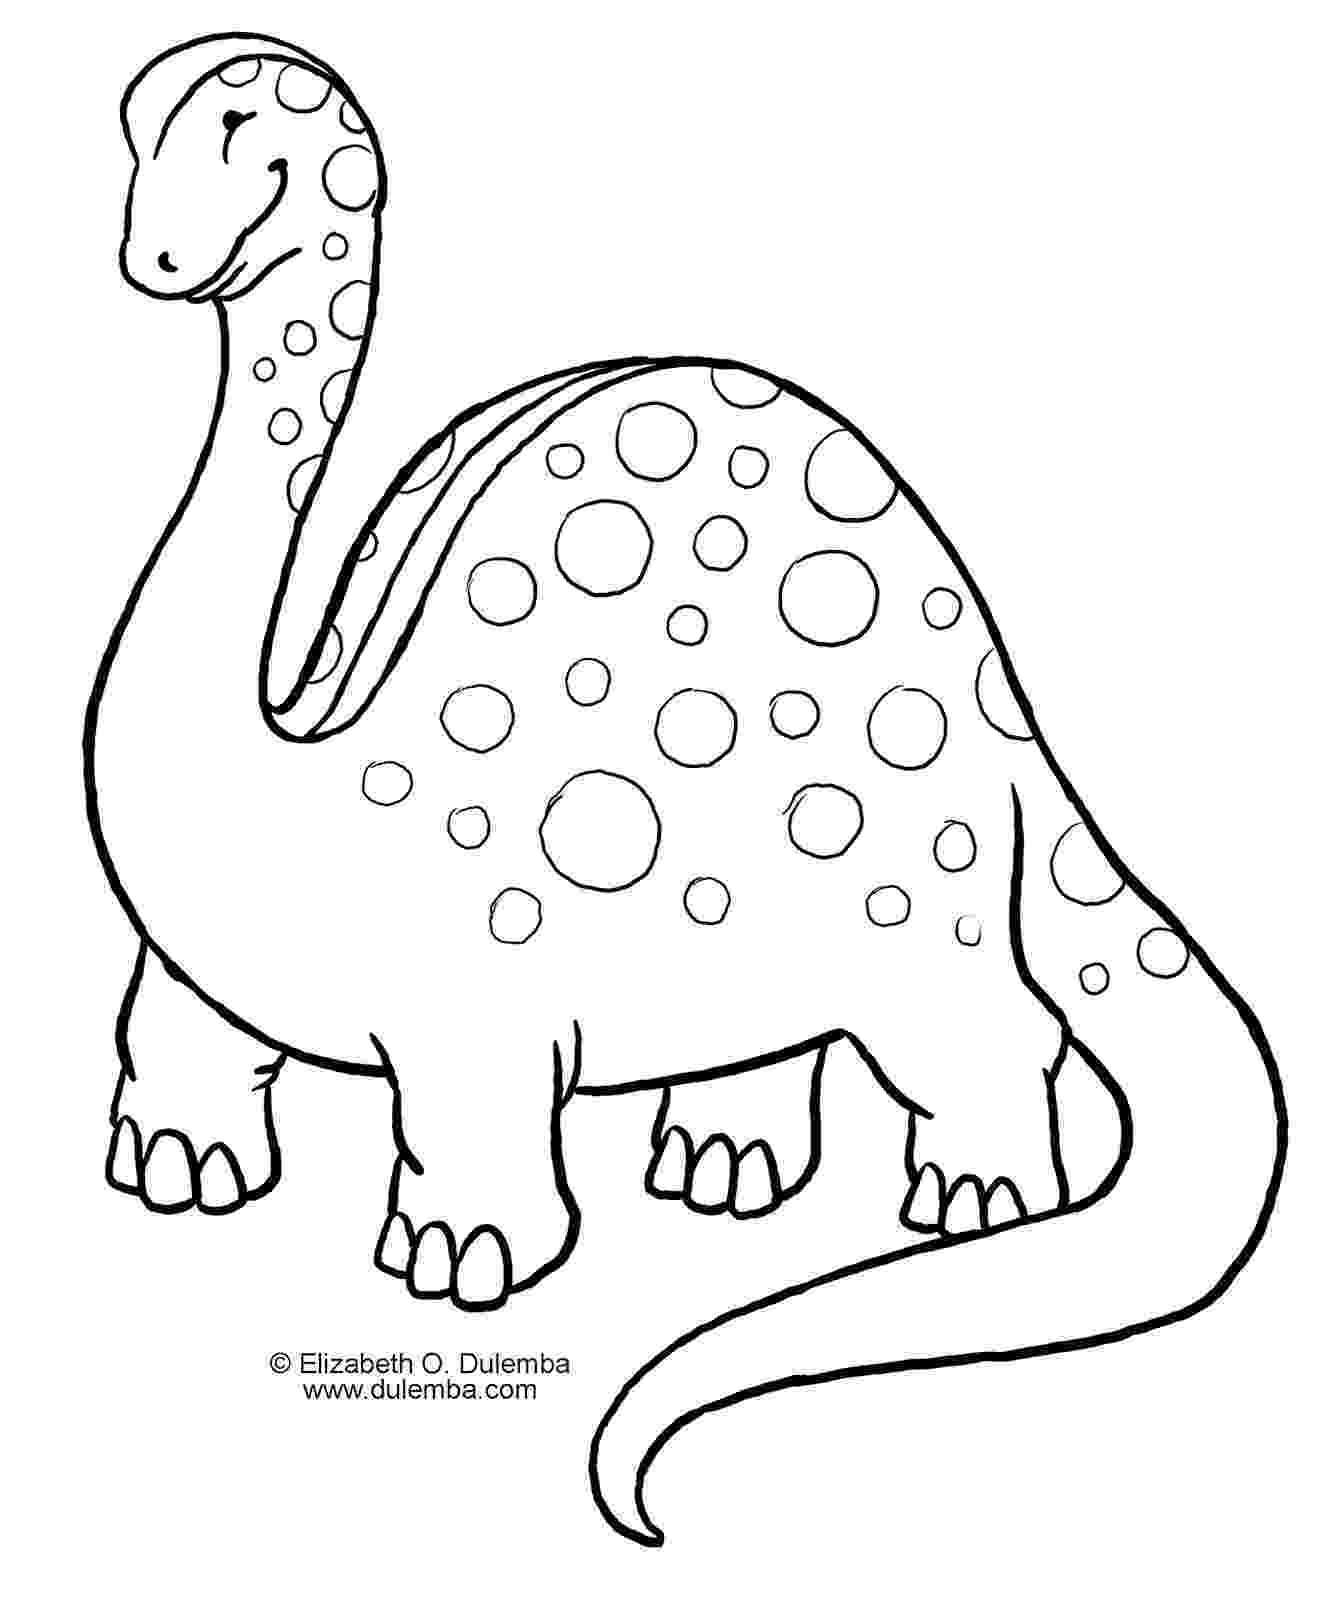 dinosaur images to print dinosaurs coloring pages printable minister coloring to print dinosaur images 